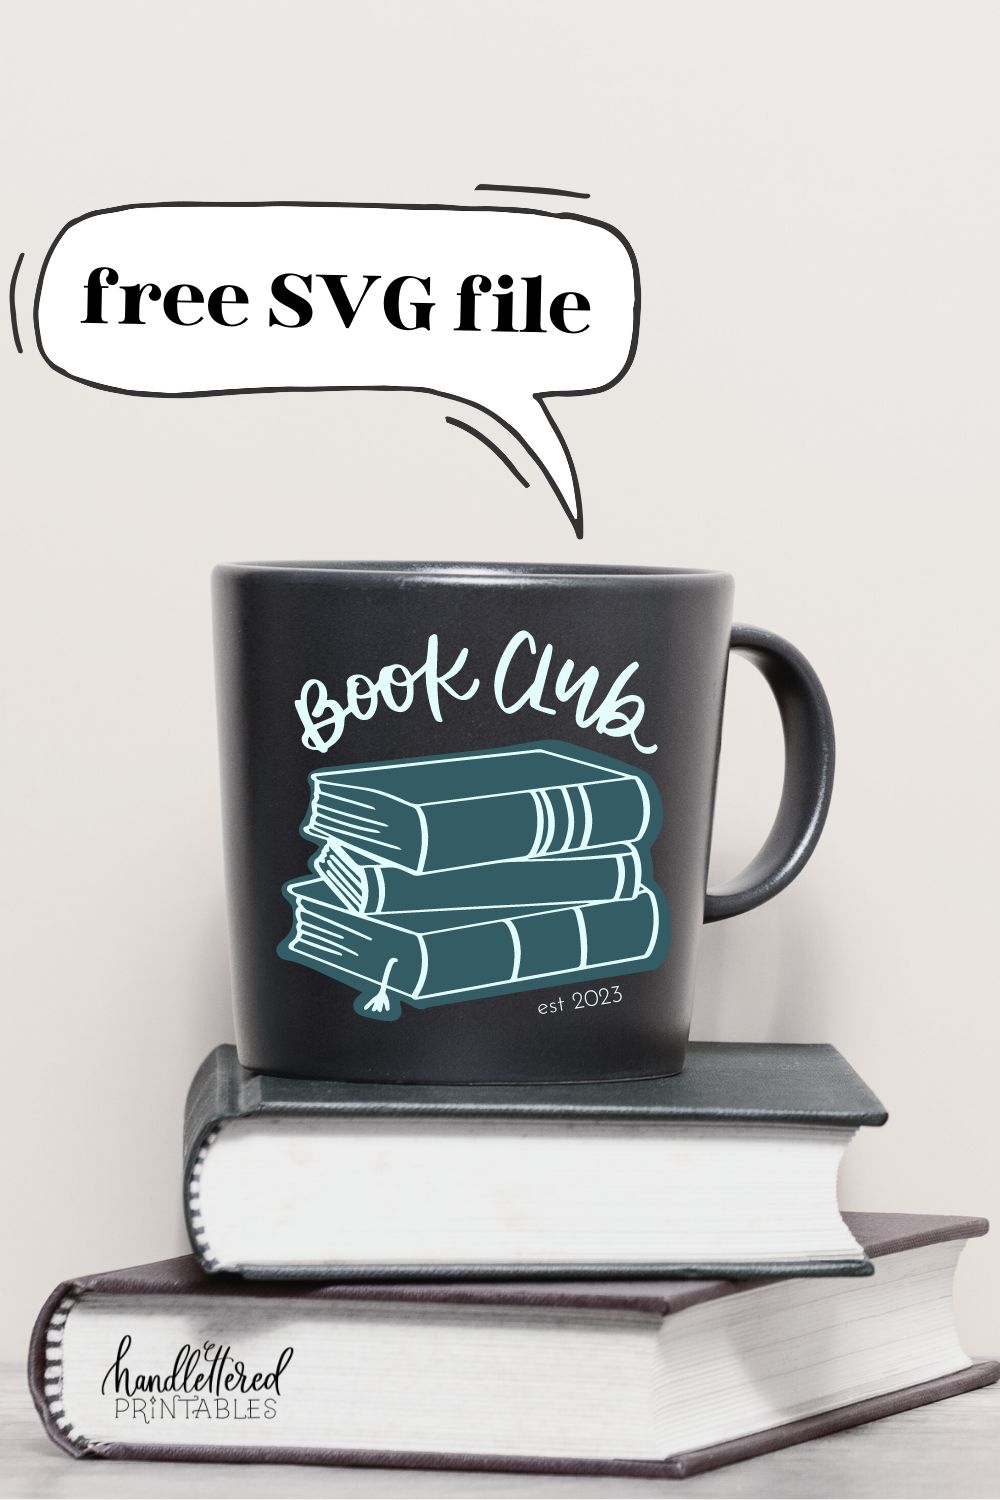 BOOK CLUB free svg with hand lettered 'book club' and stack of books with solid color background. text on image reads 'free SVG file'. Design shown on a mug sitting on top of a stack of books